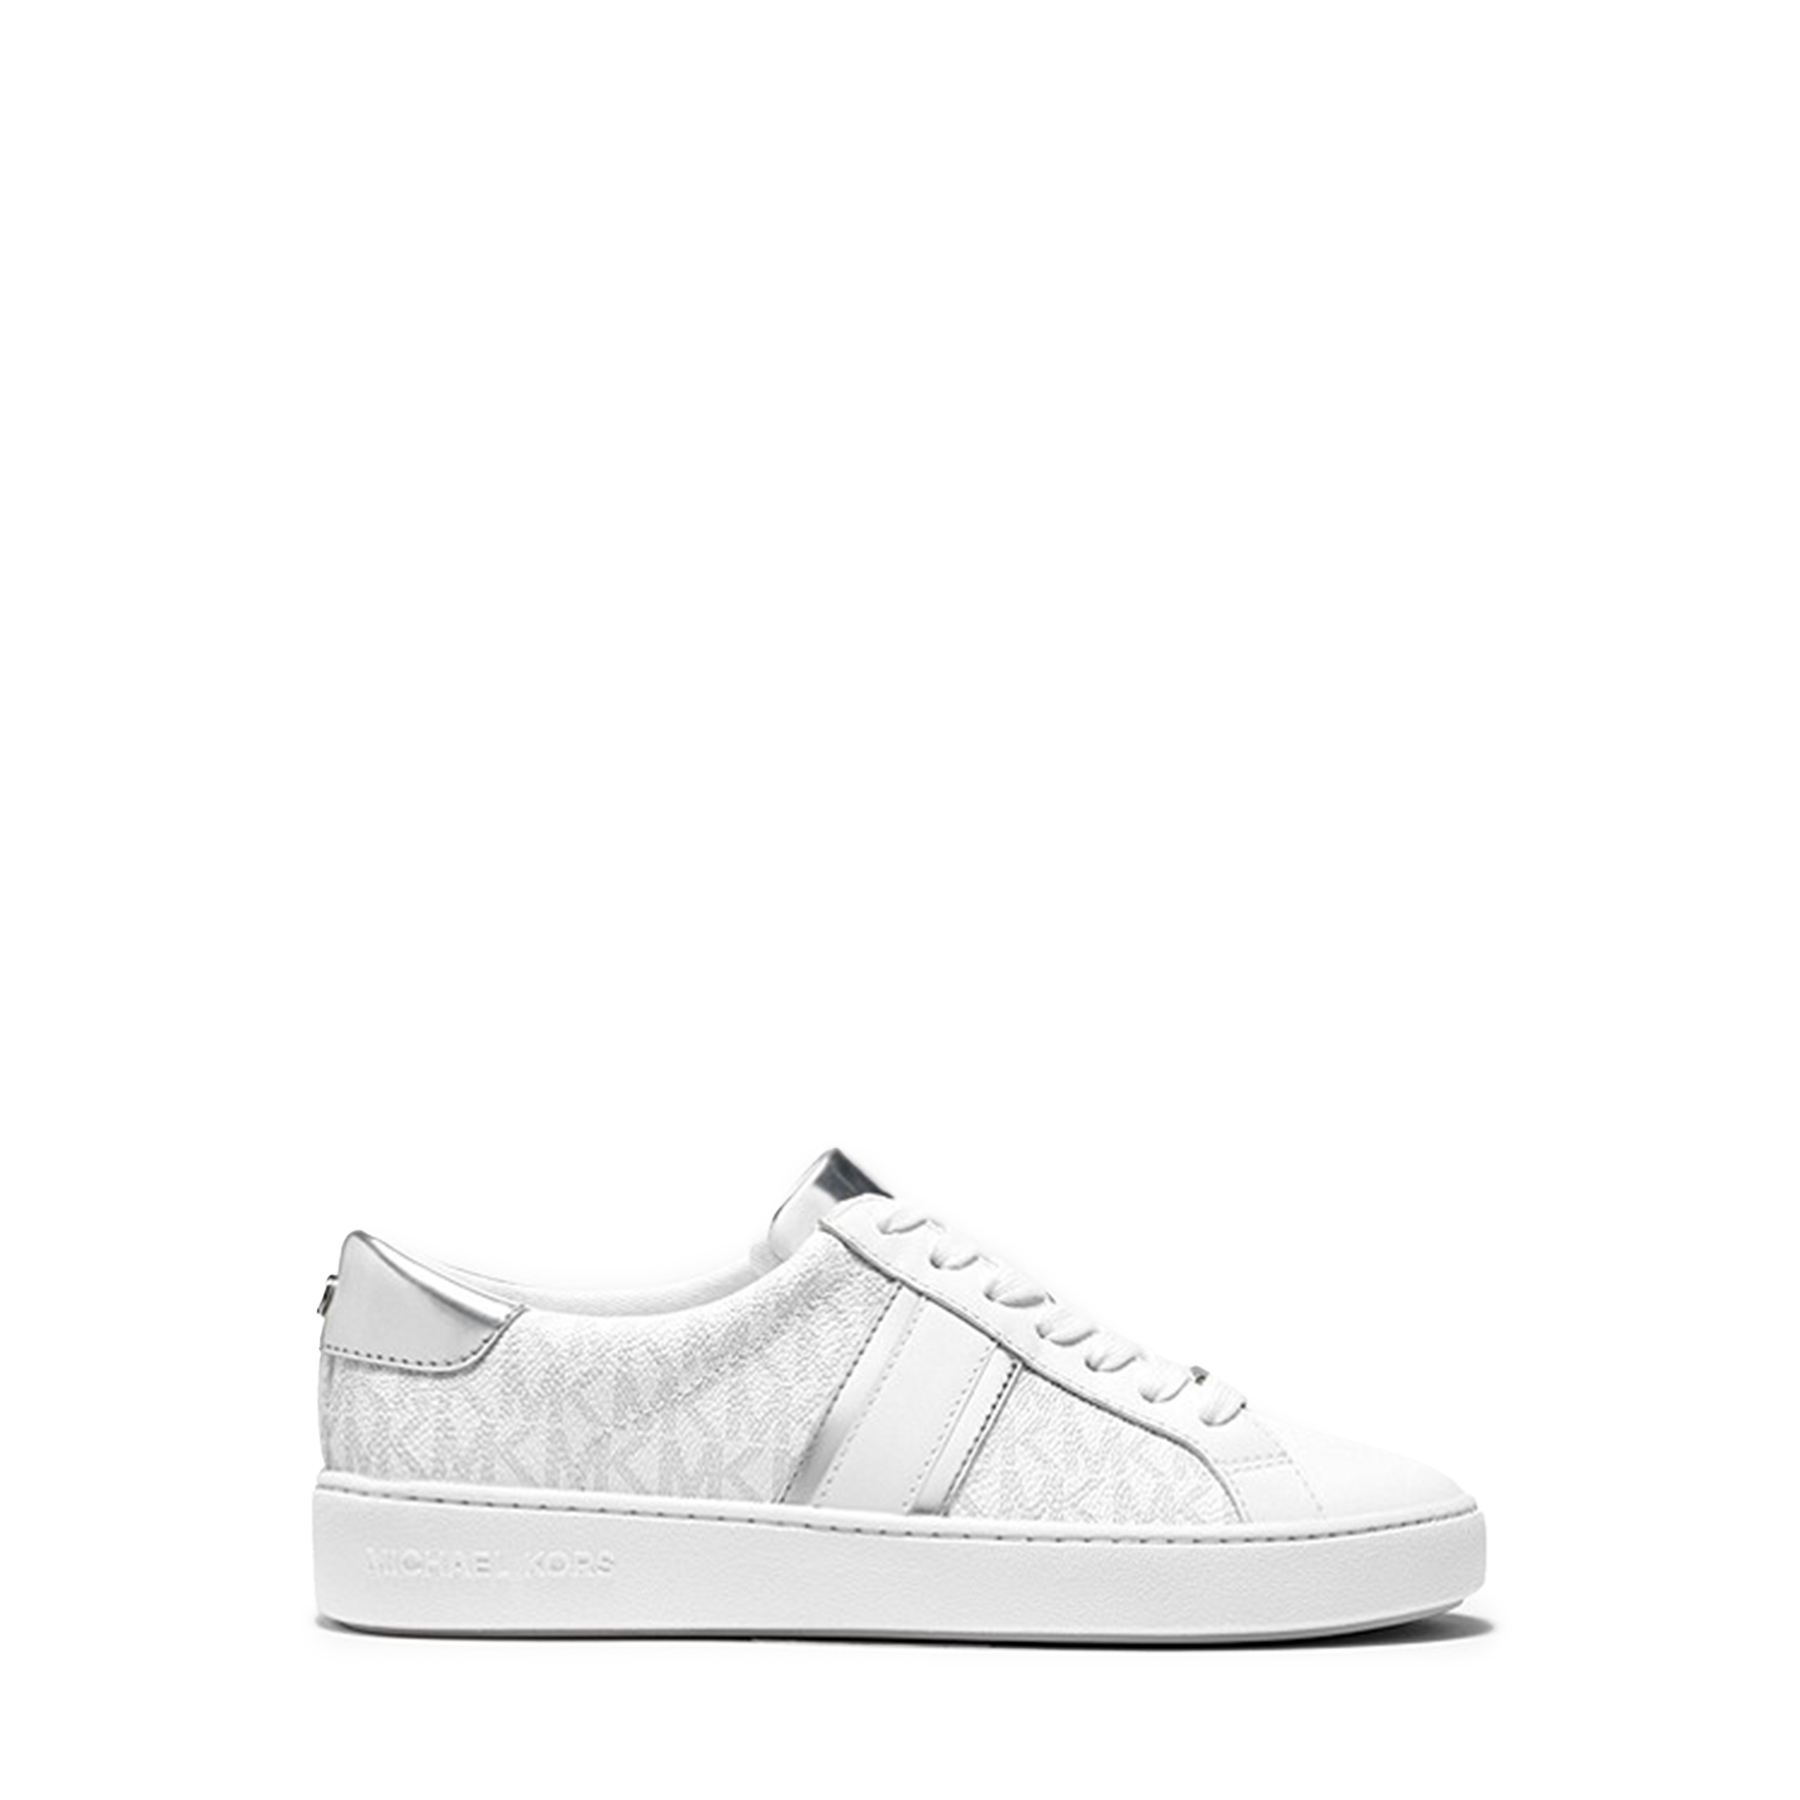 Michael Kors Sneakers - IRVING STRIPE LACE UP white